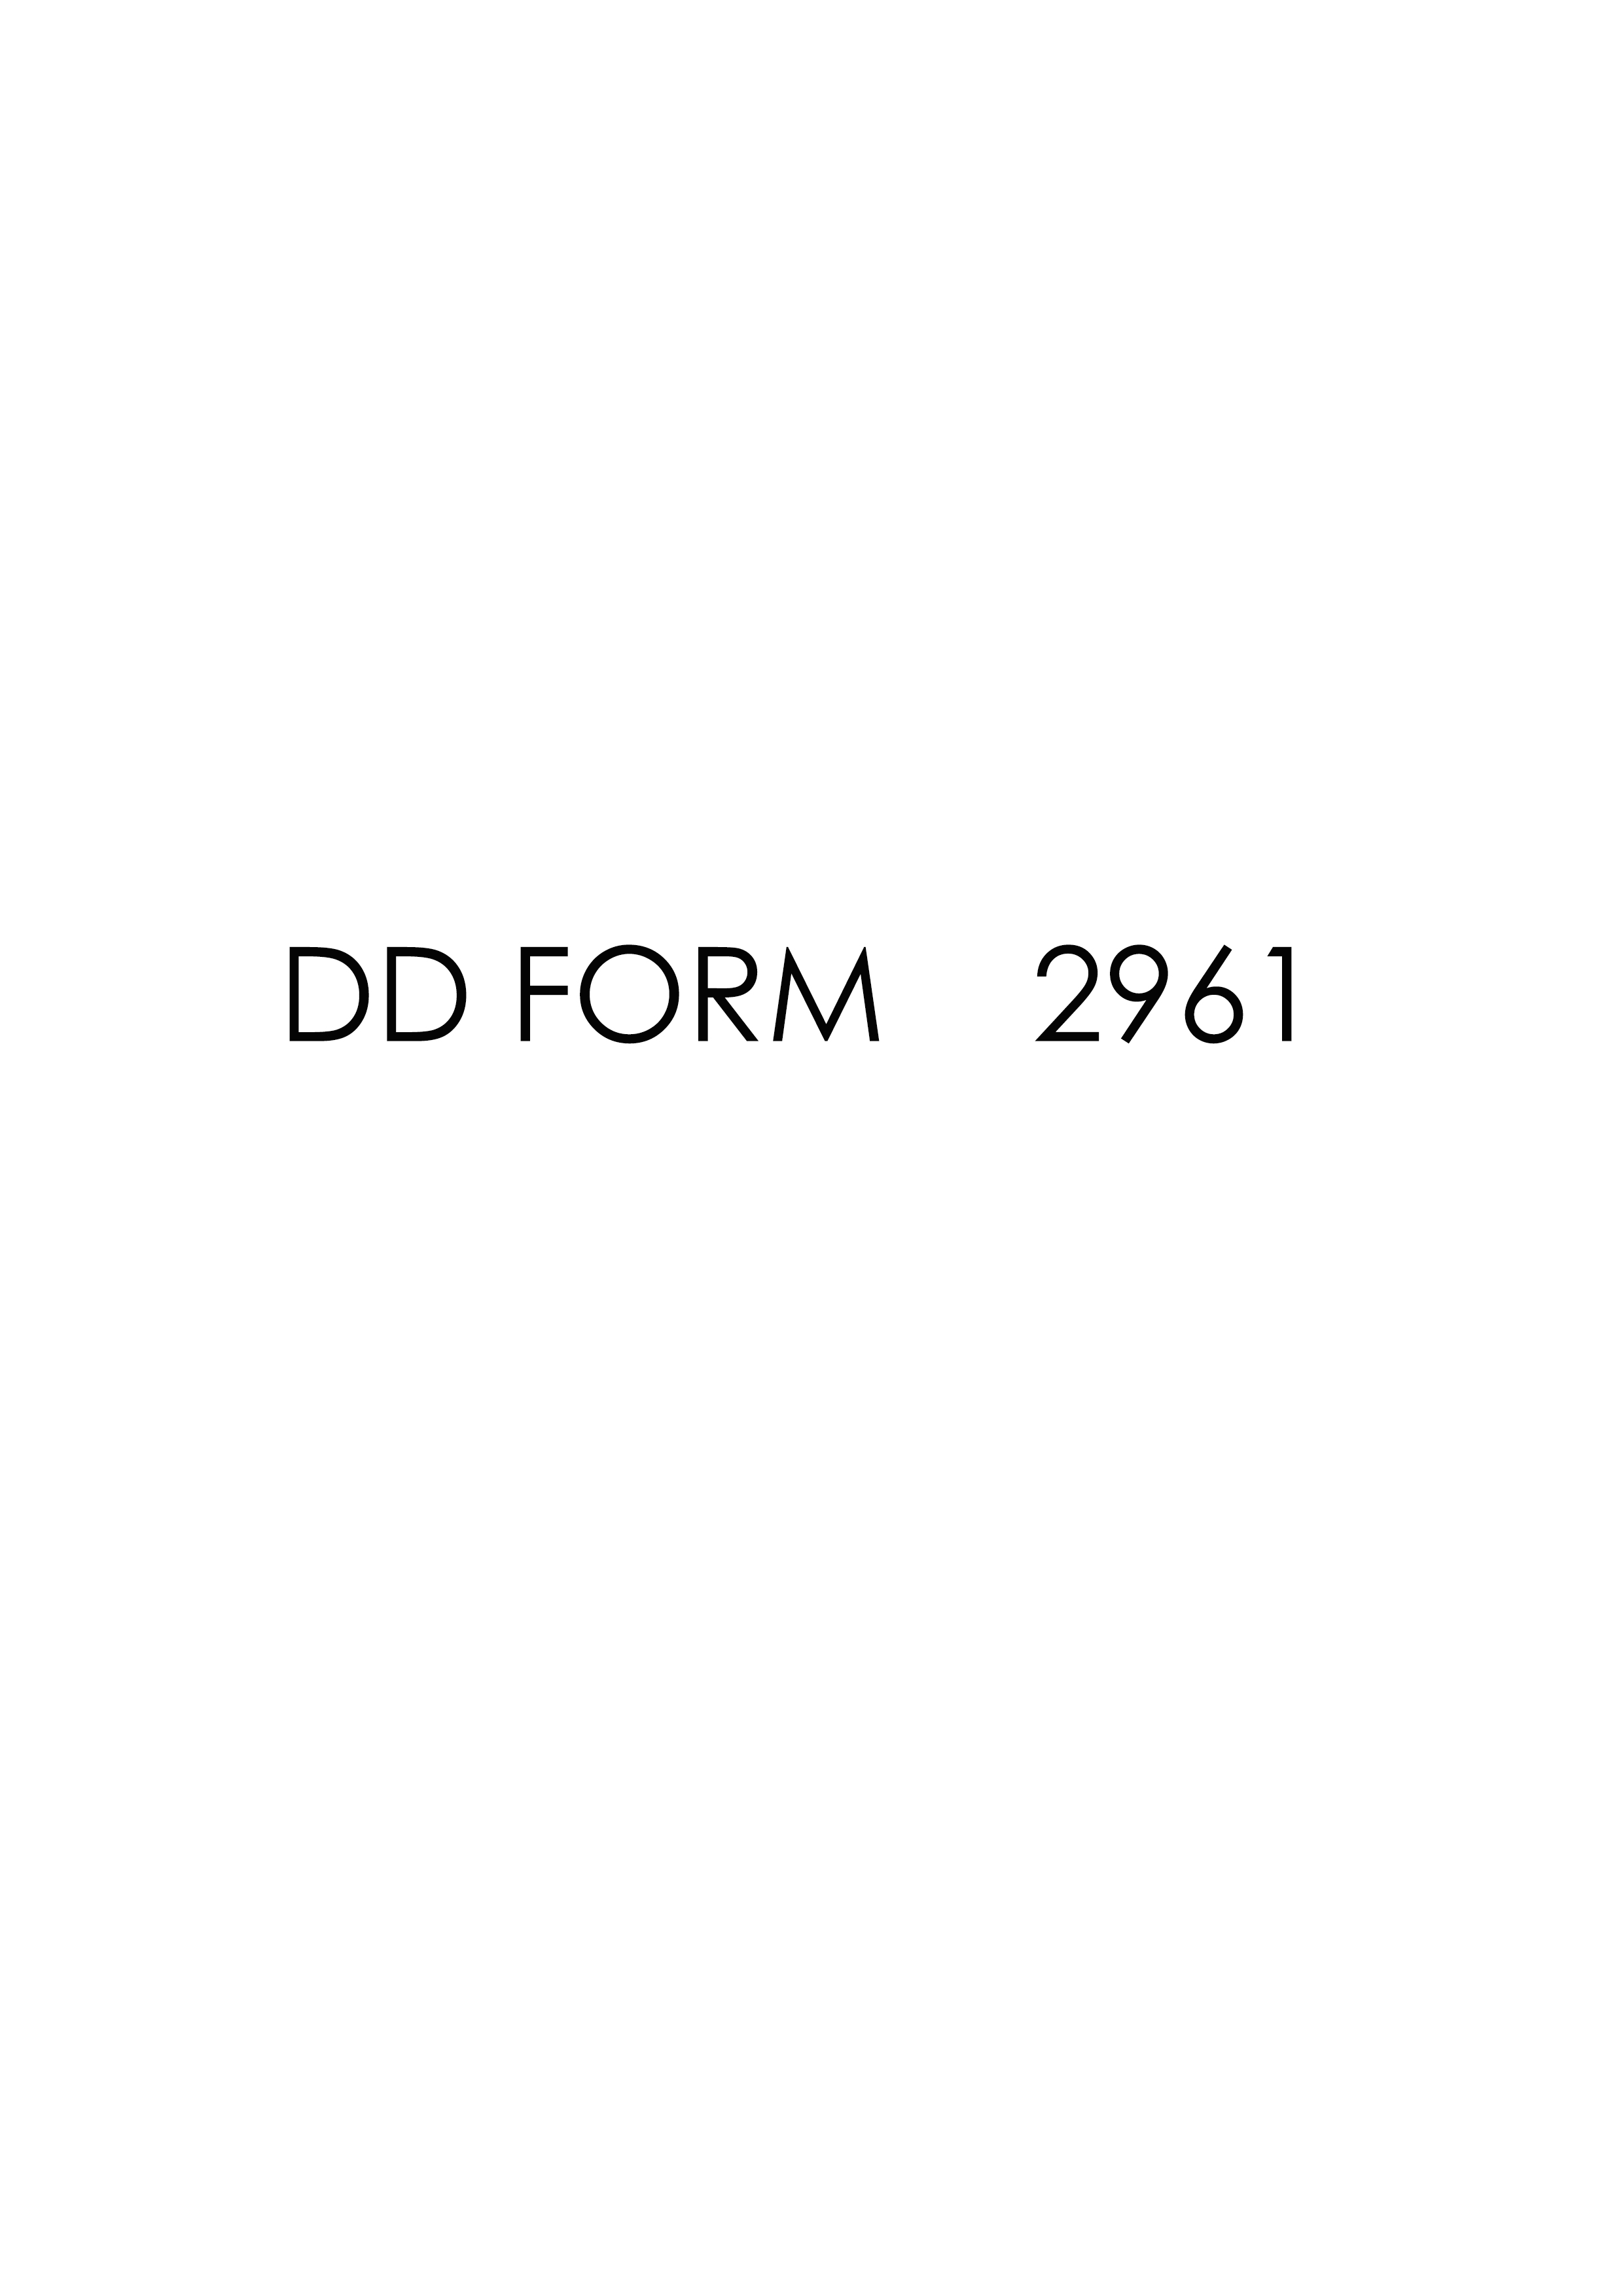 Download Fillable dd Form 2961